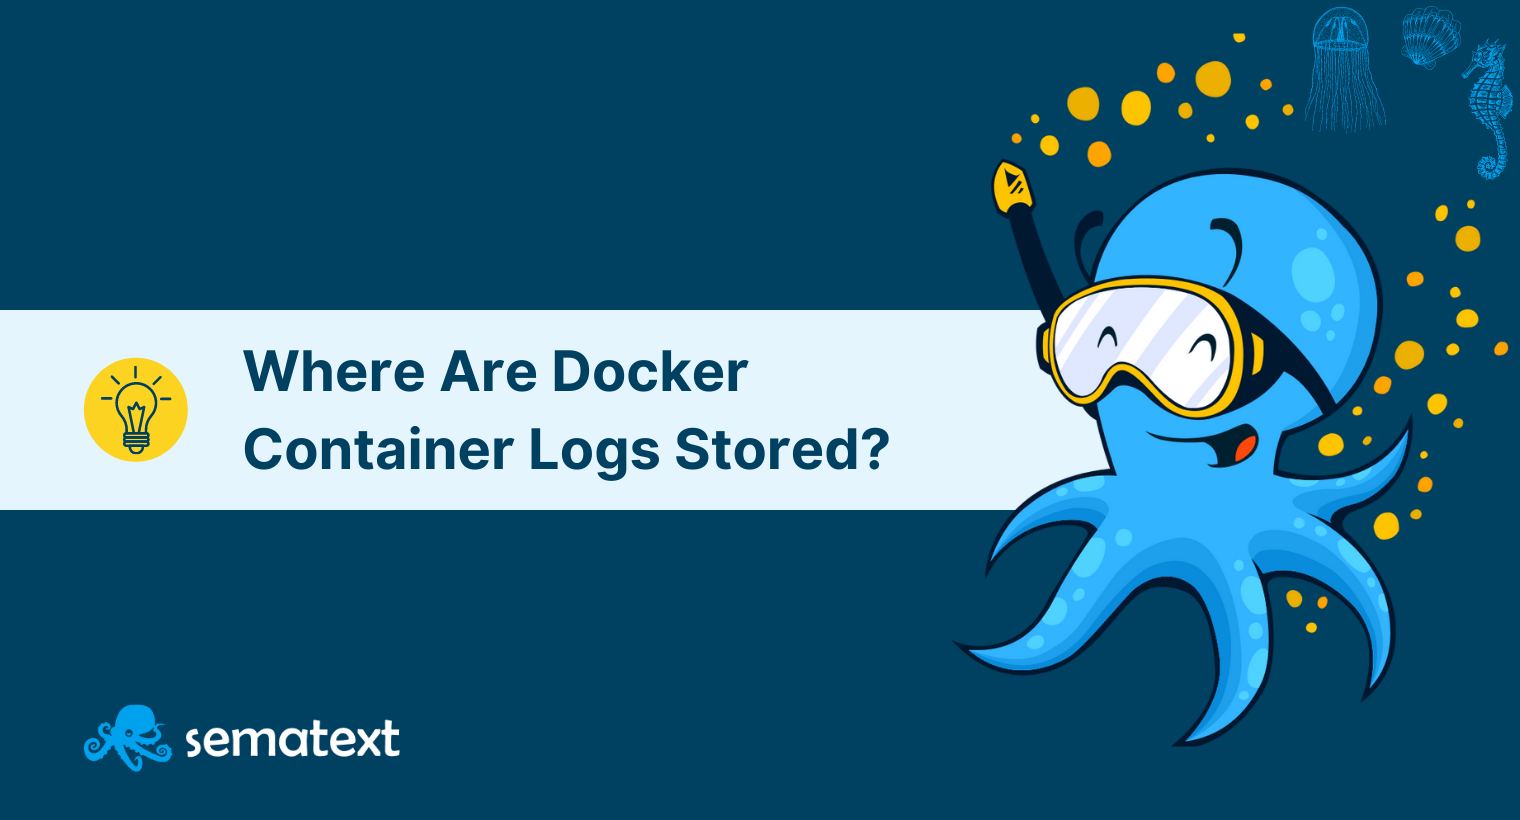 Where Are Docker Container Logs Stored?